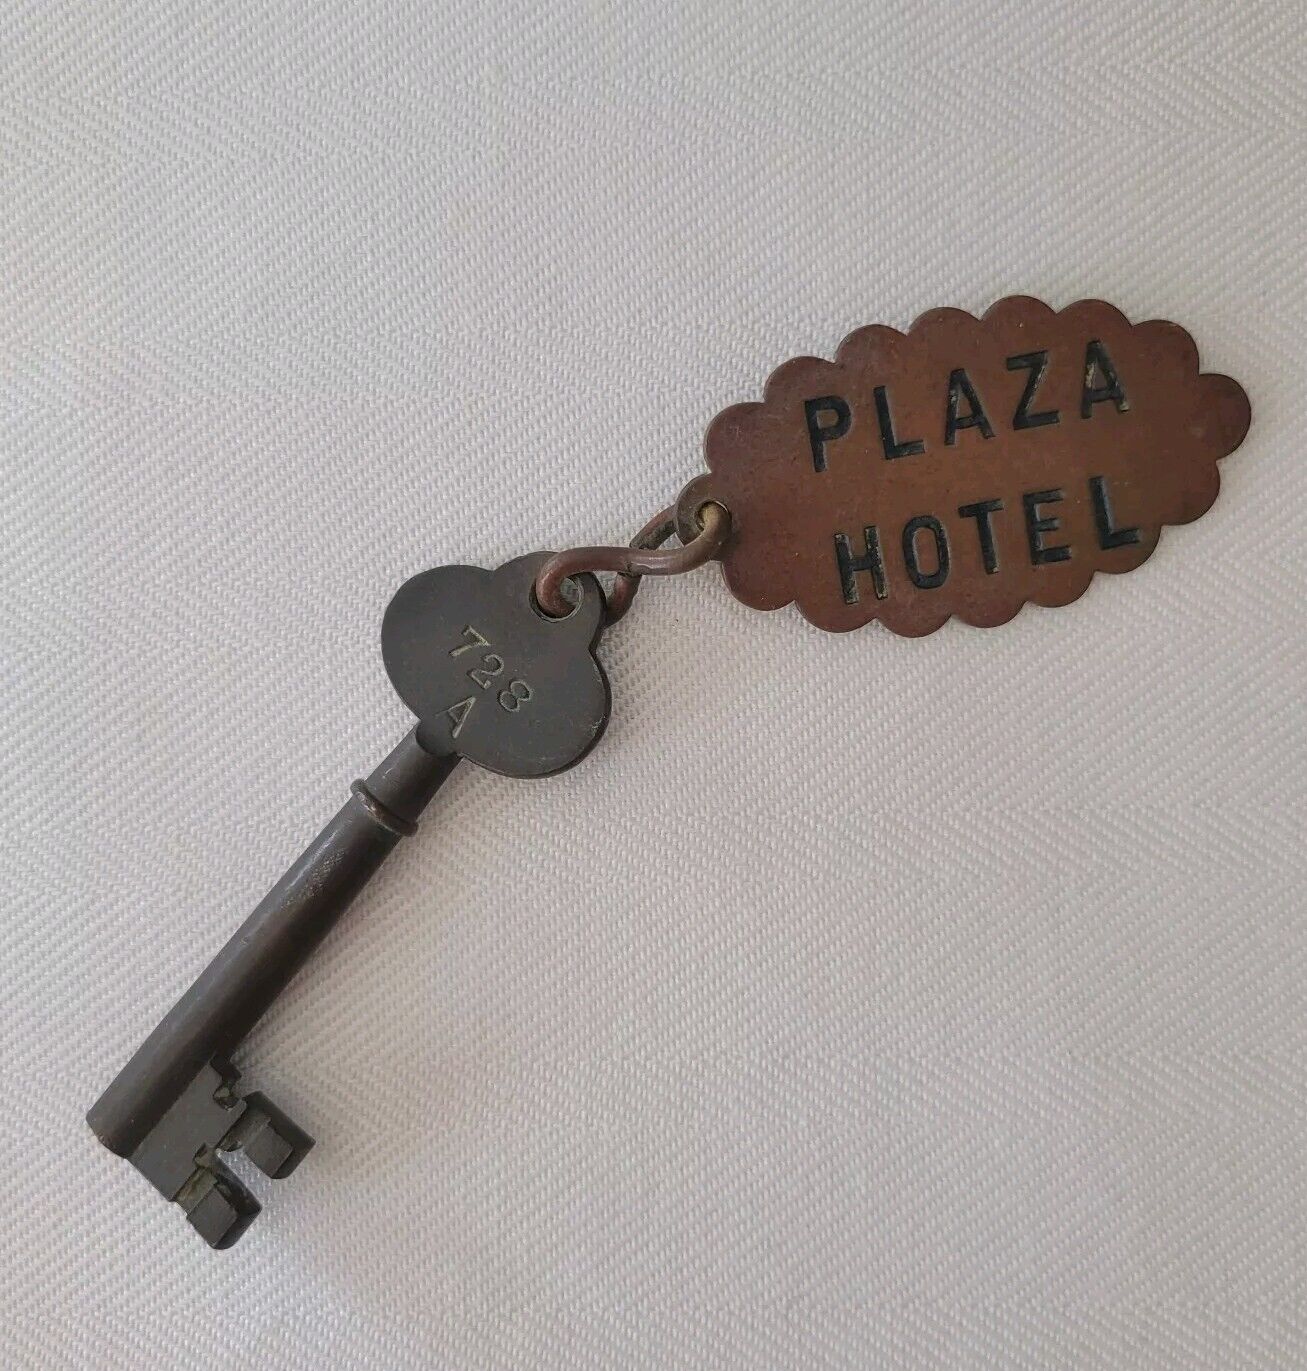 Authentic Antique Hotel Key & Fob THE PLAZA HOTEL New York City 49gr RARE FIND